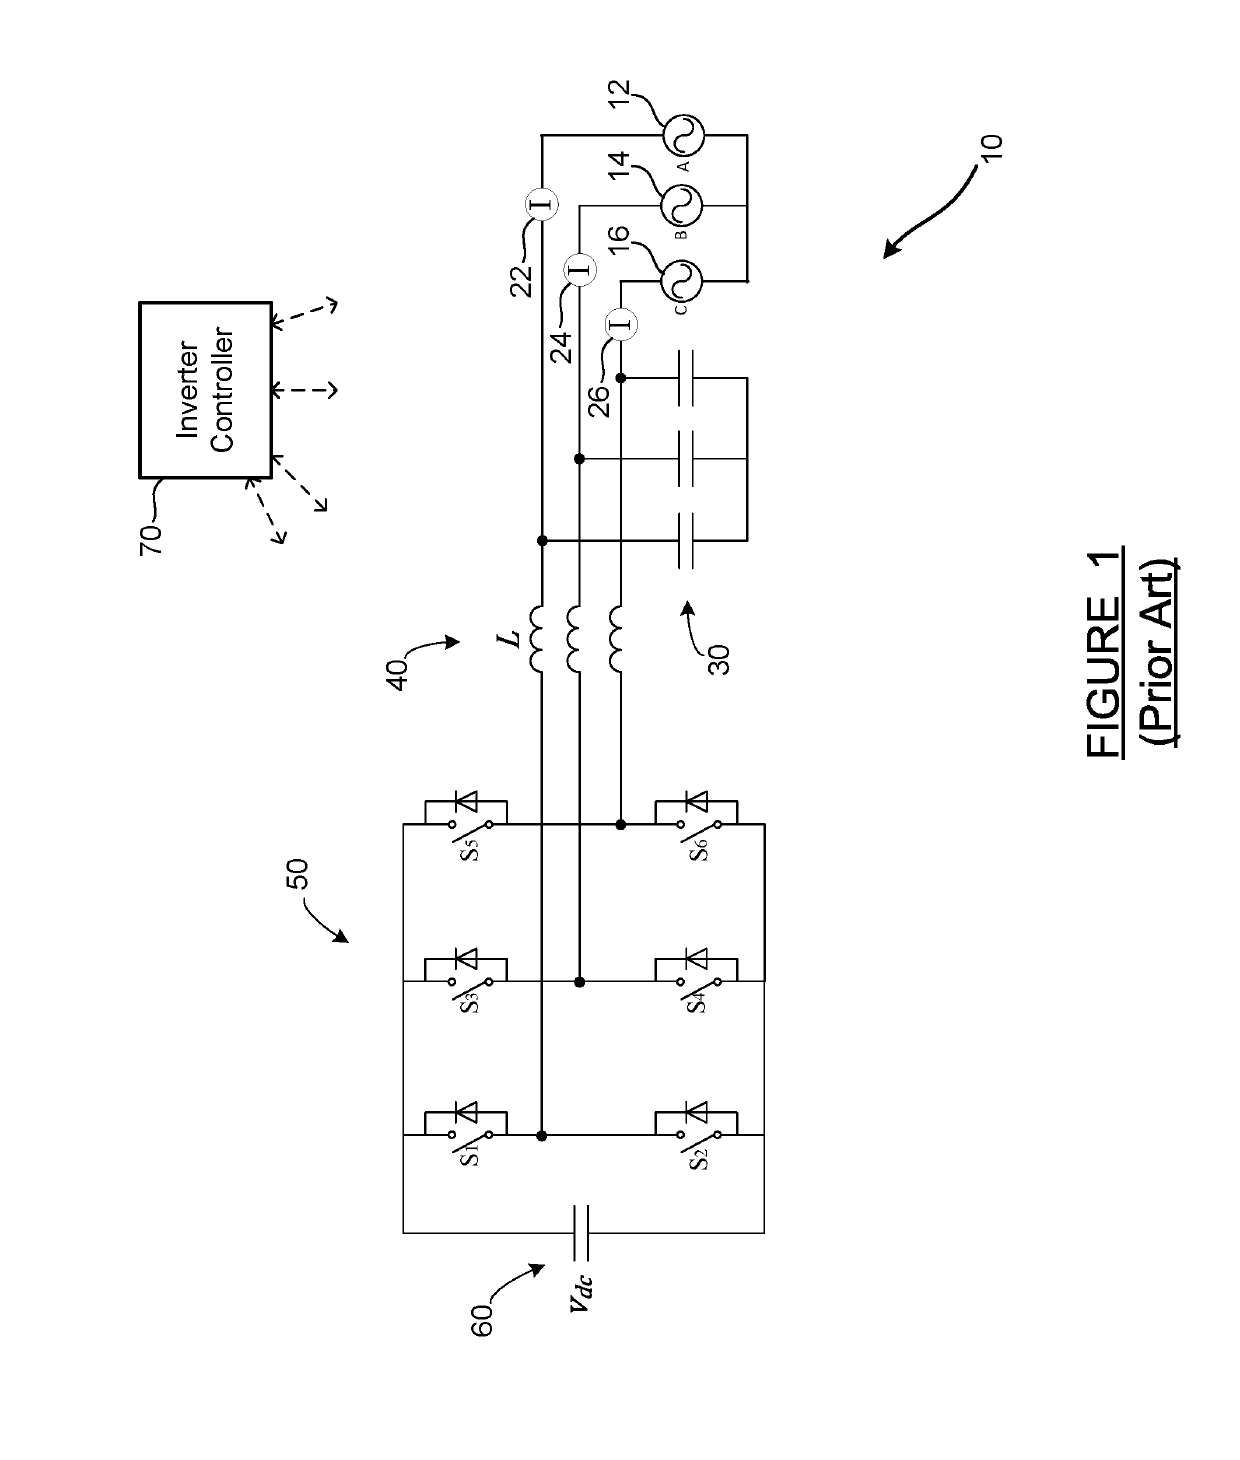 Three phase inverter dc-link voltage control method for reactive power overload transient process